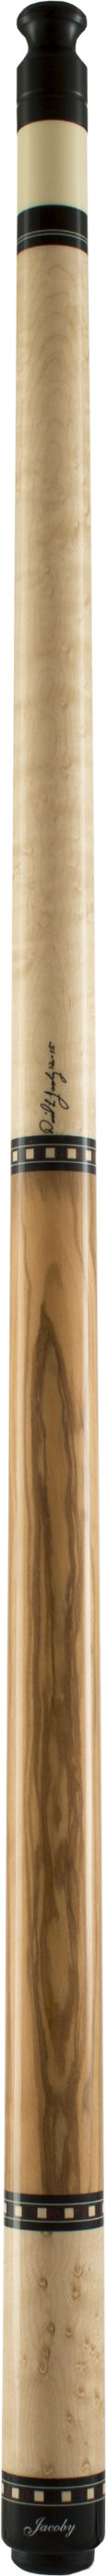 Jacoby JCB01 Pool Cue -Jacoby